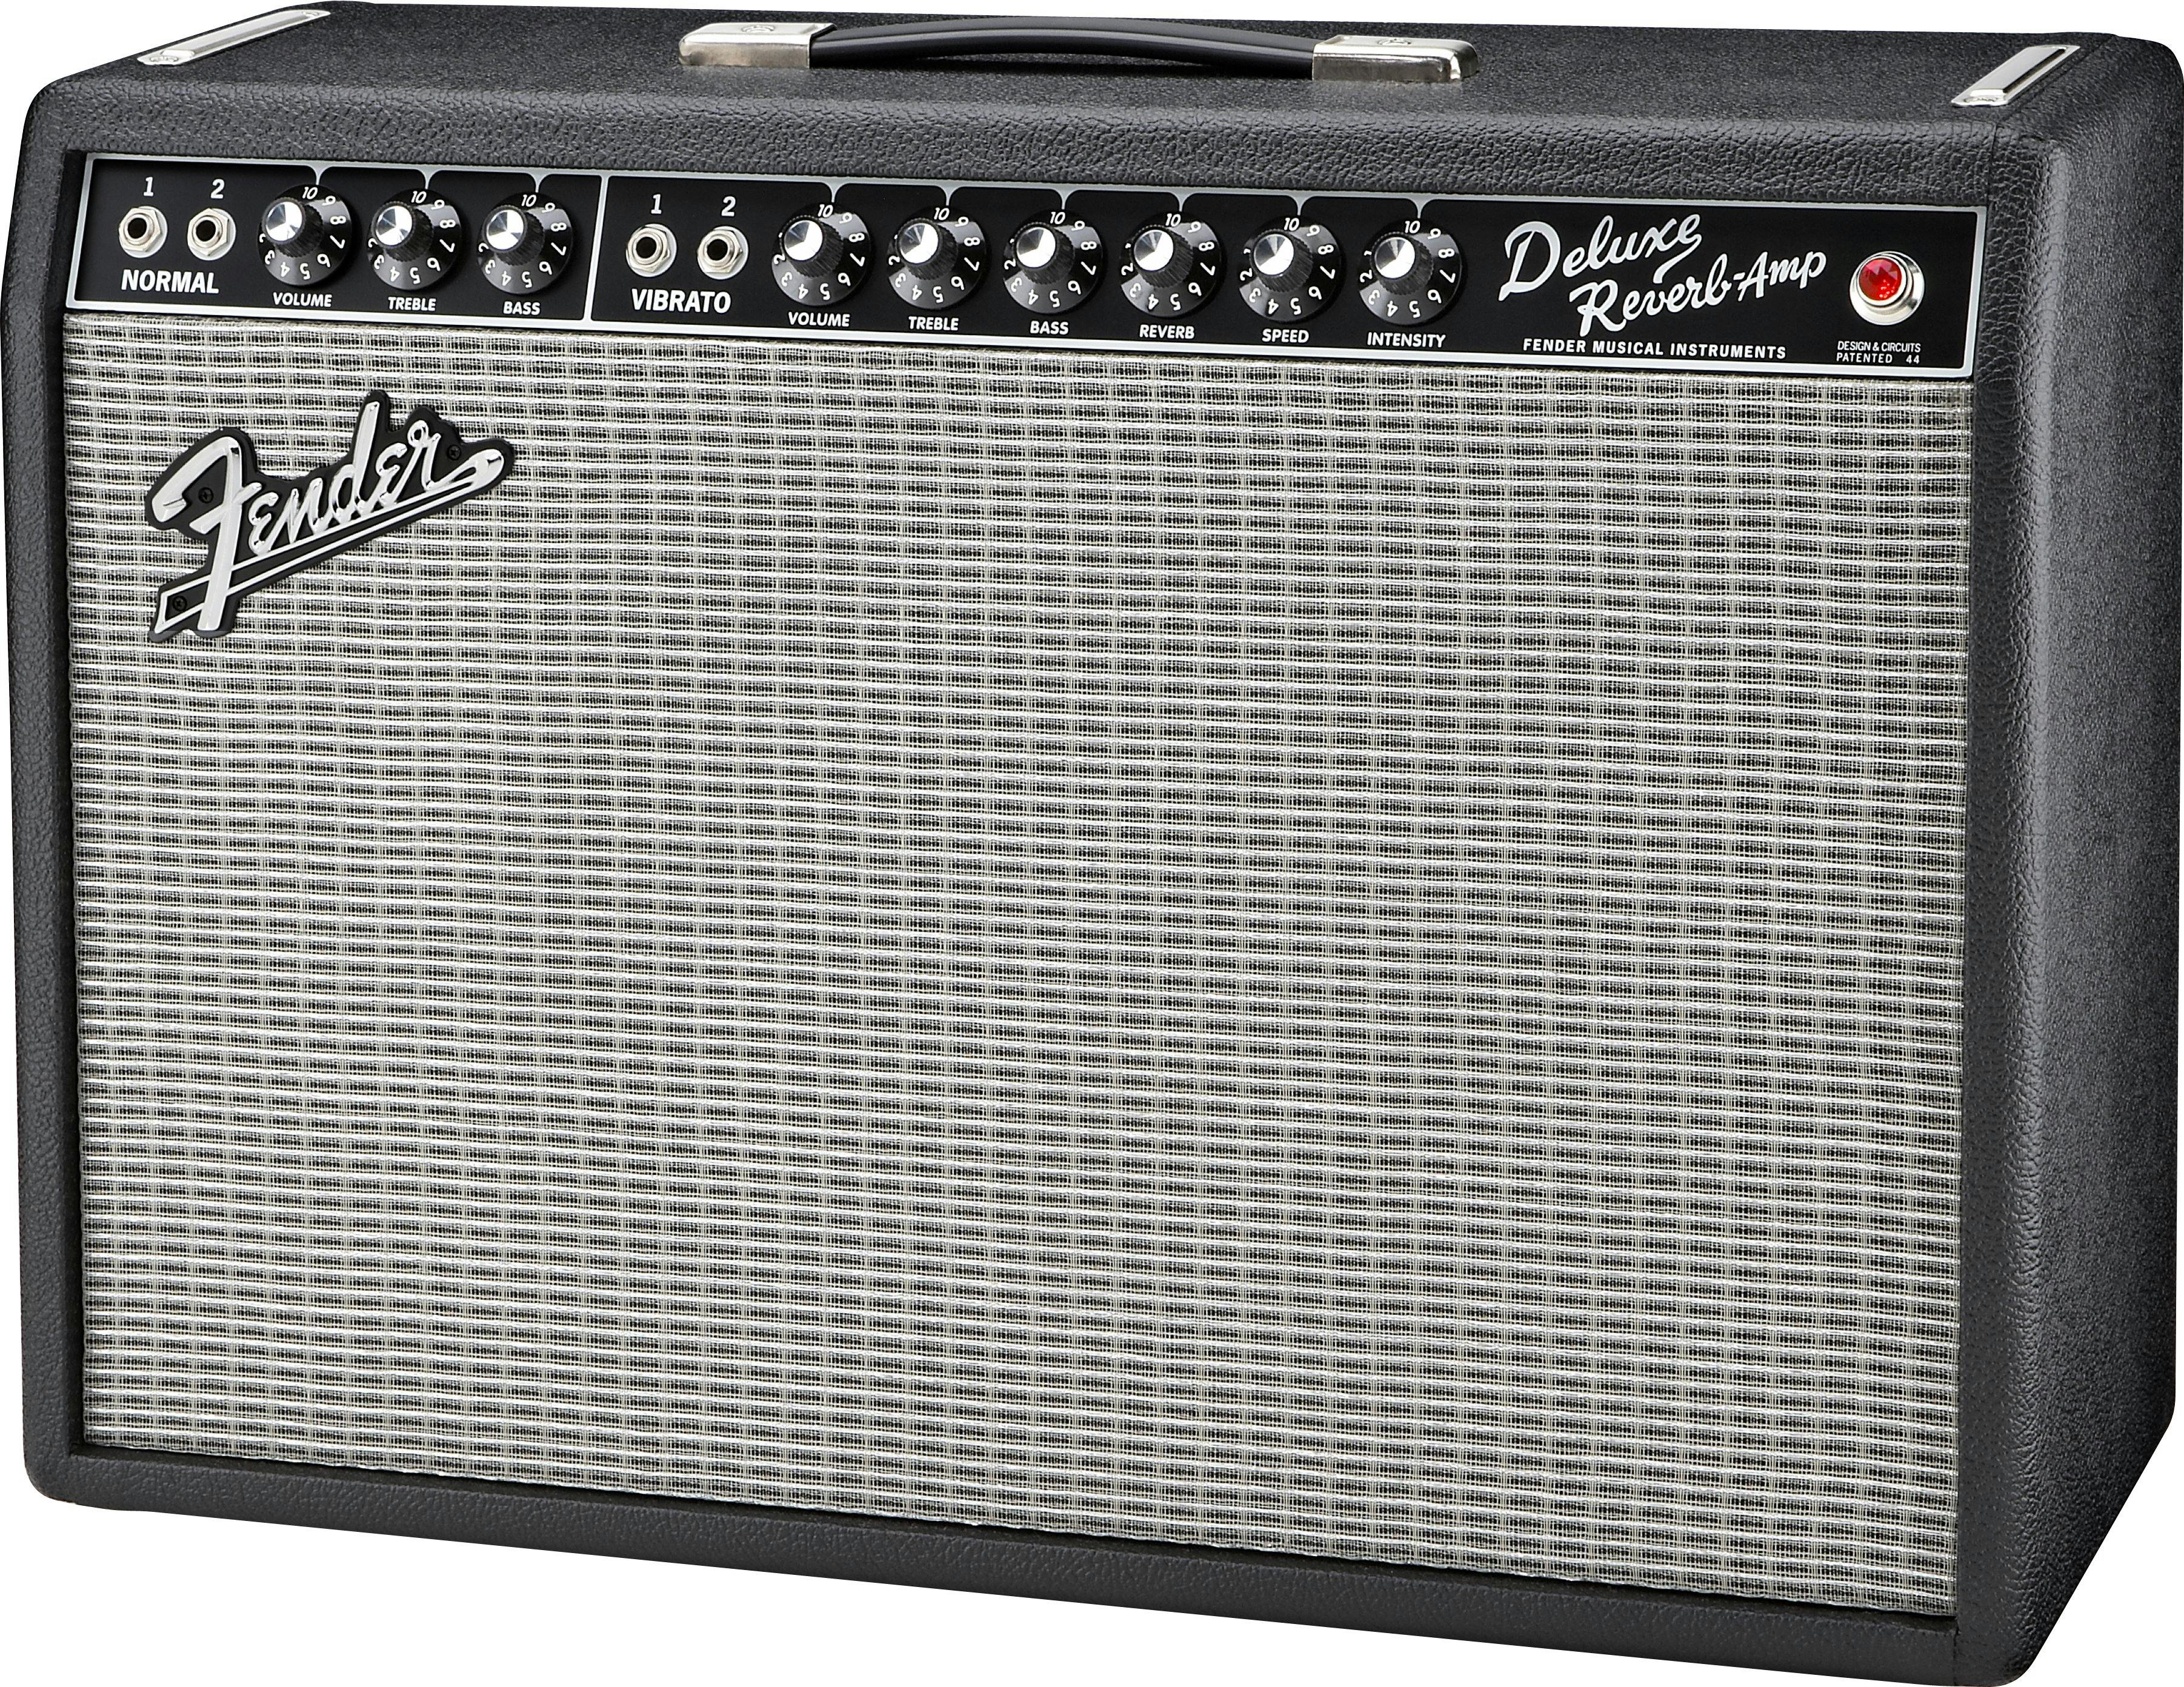 Fender '65 Deluxe Reverb combo amp - Andertons Music Co.